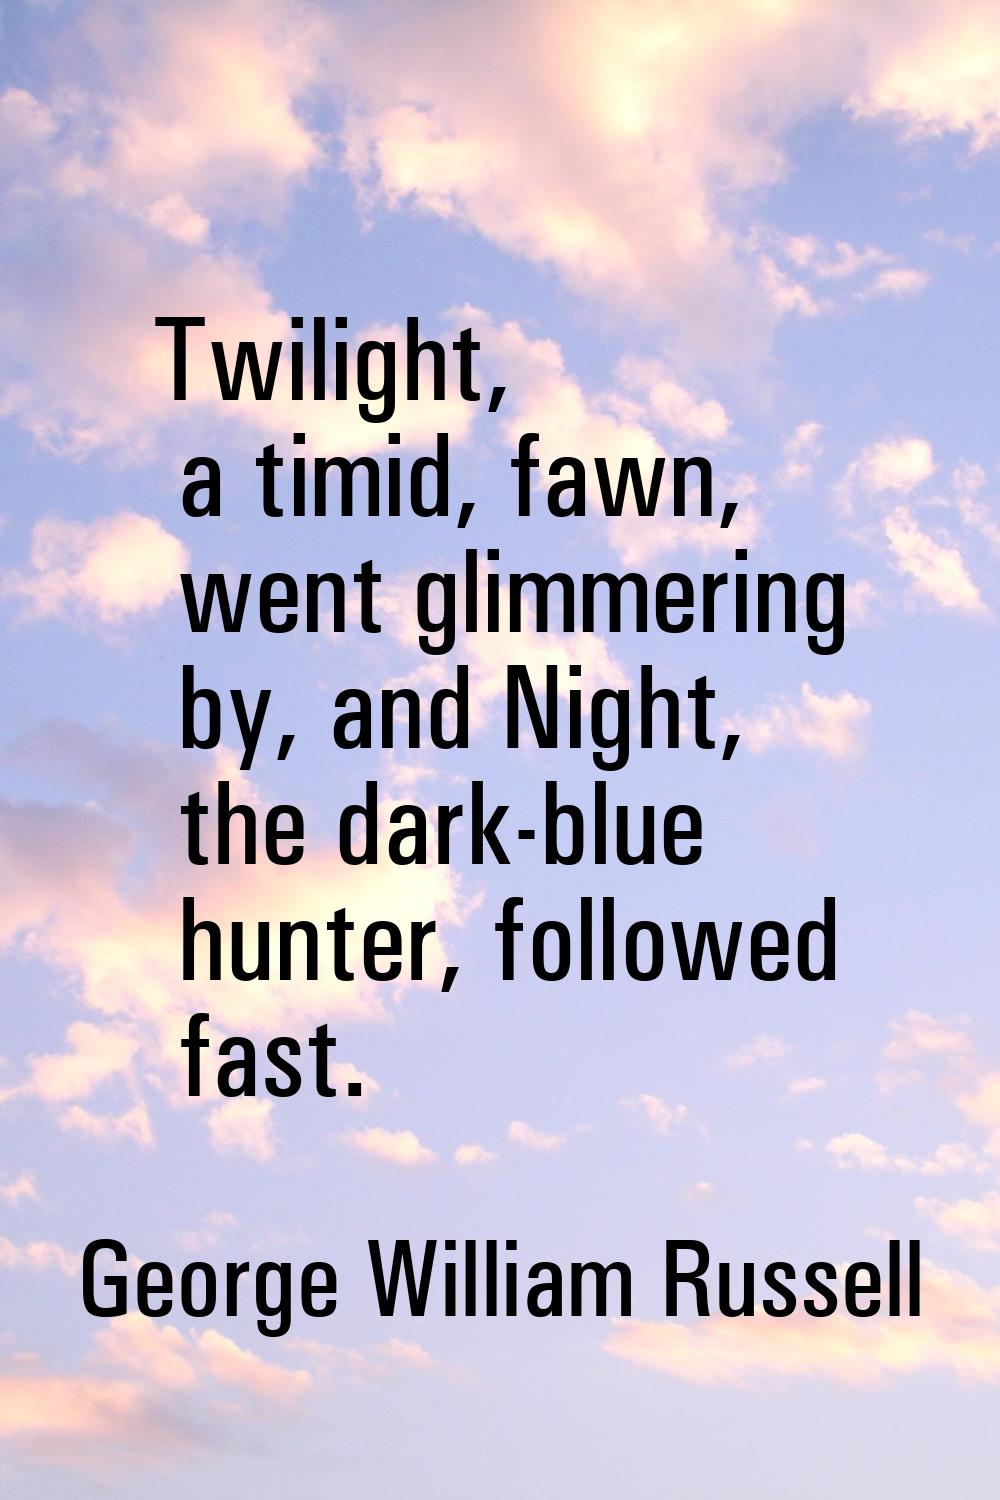 Twilight, a timid, fawn, went glimmering by, and Night, the dark-blue hunter, followed fast.